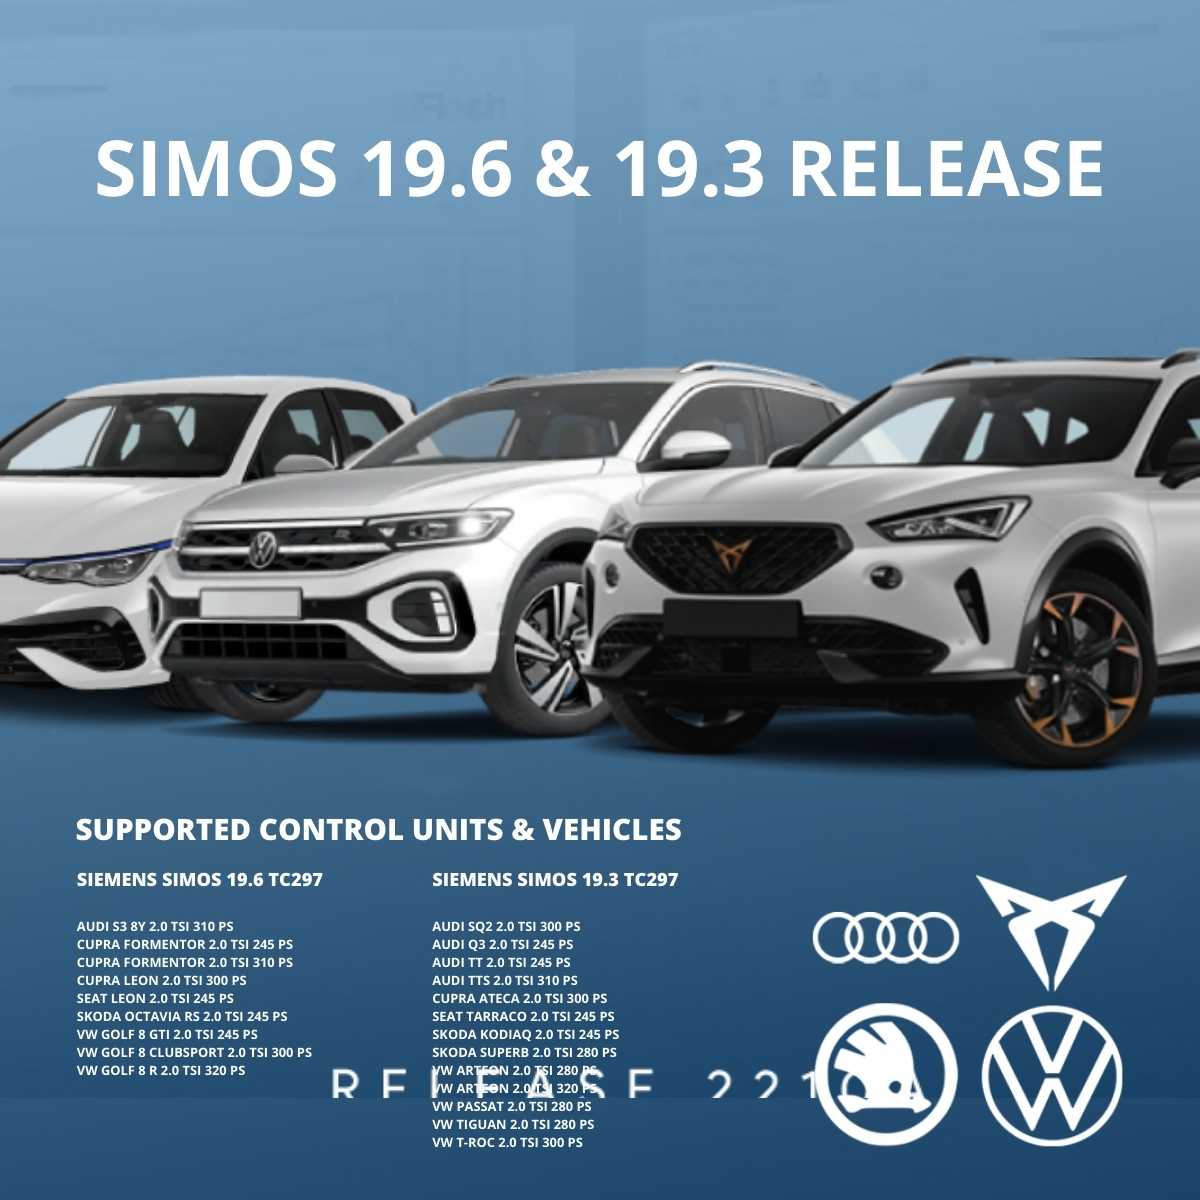 promo post simos release 3 cwhite cars on a blue background with info text of all models